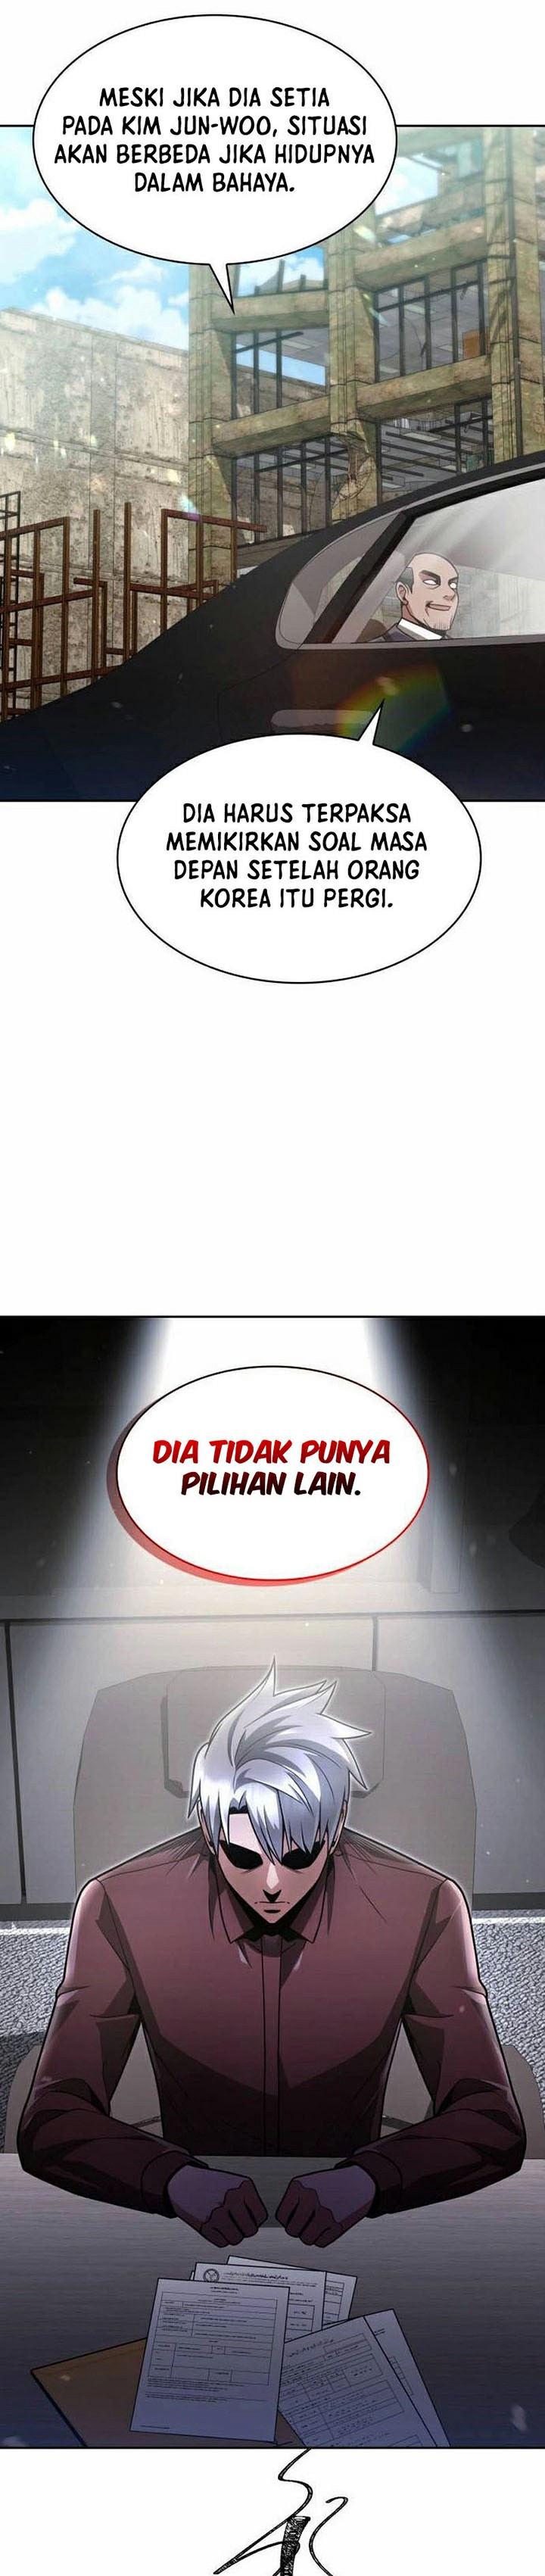 Dilarang COPAS - situs resmi www.mangacanblog.com - Komik clever cleaning life of the returned genius hunter 062 - chapter 62 63 Indonesia clever cleaning life of the returned genius hunter 062 - chapter 62 Terbaru 33|Baca Manga Komik Indonesia|Mangacan